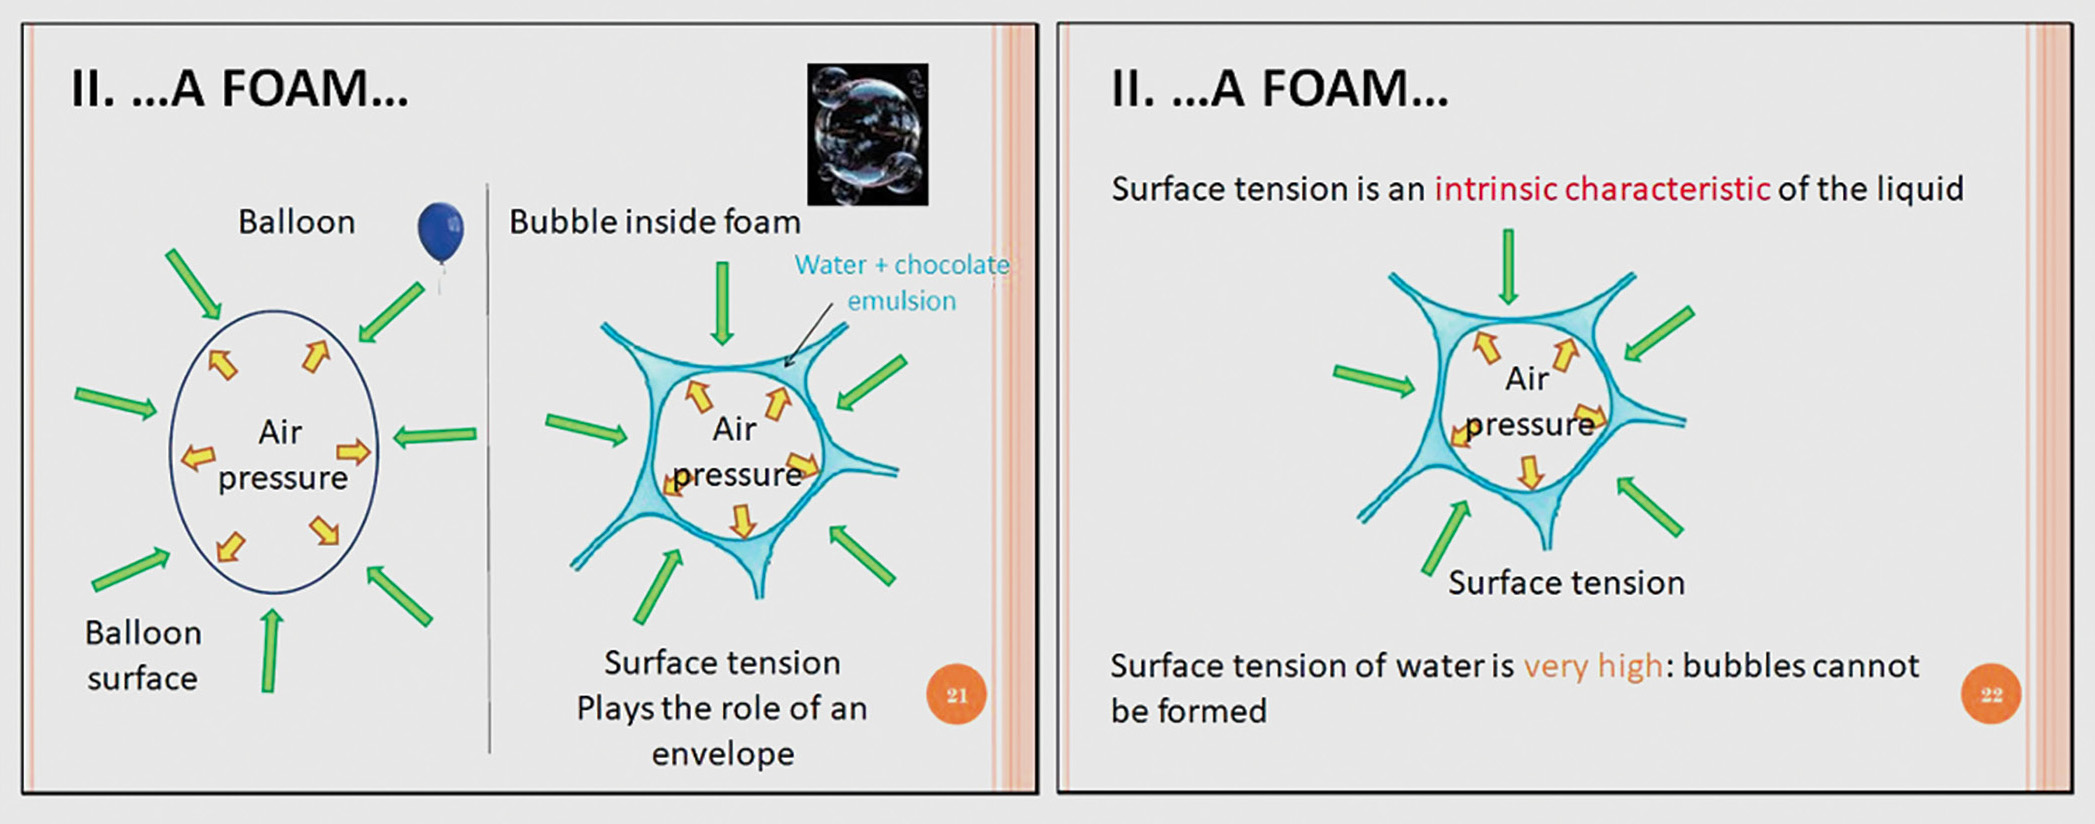 Figure 7 Slides explaining the surface tension concept. Slides were translated from French to English.